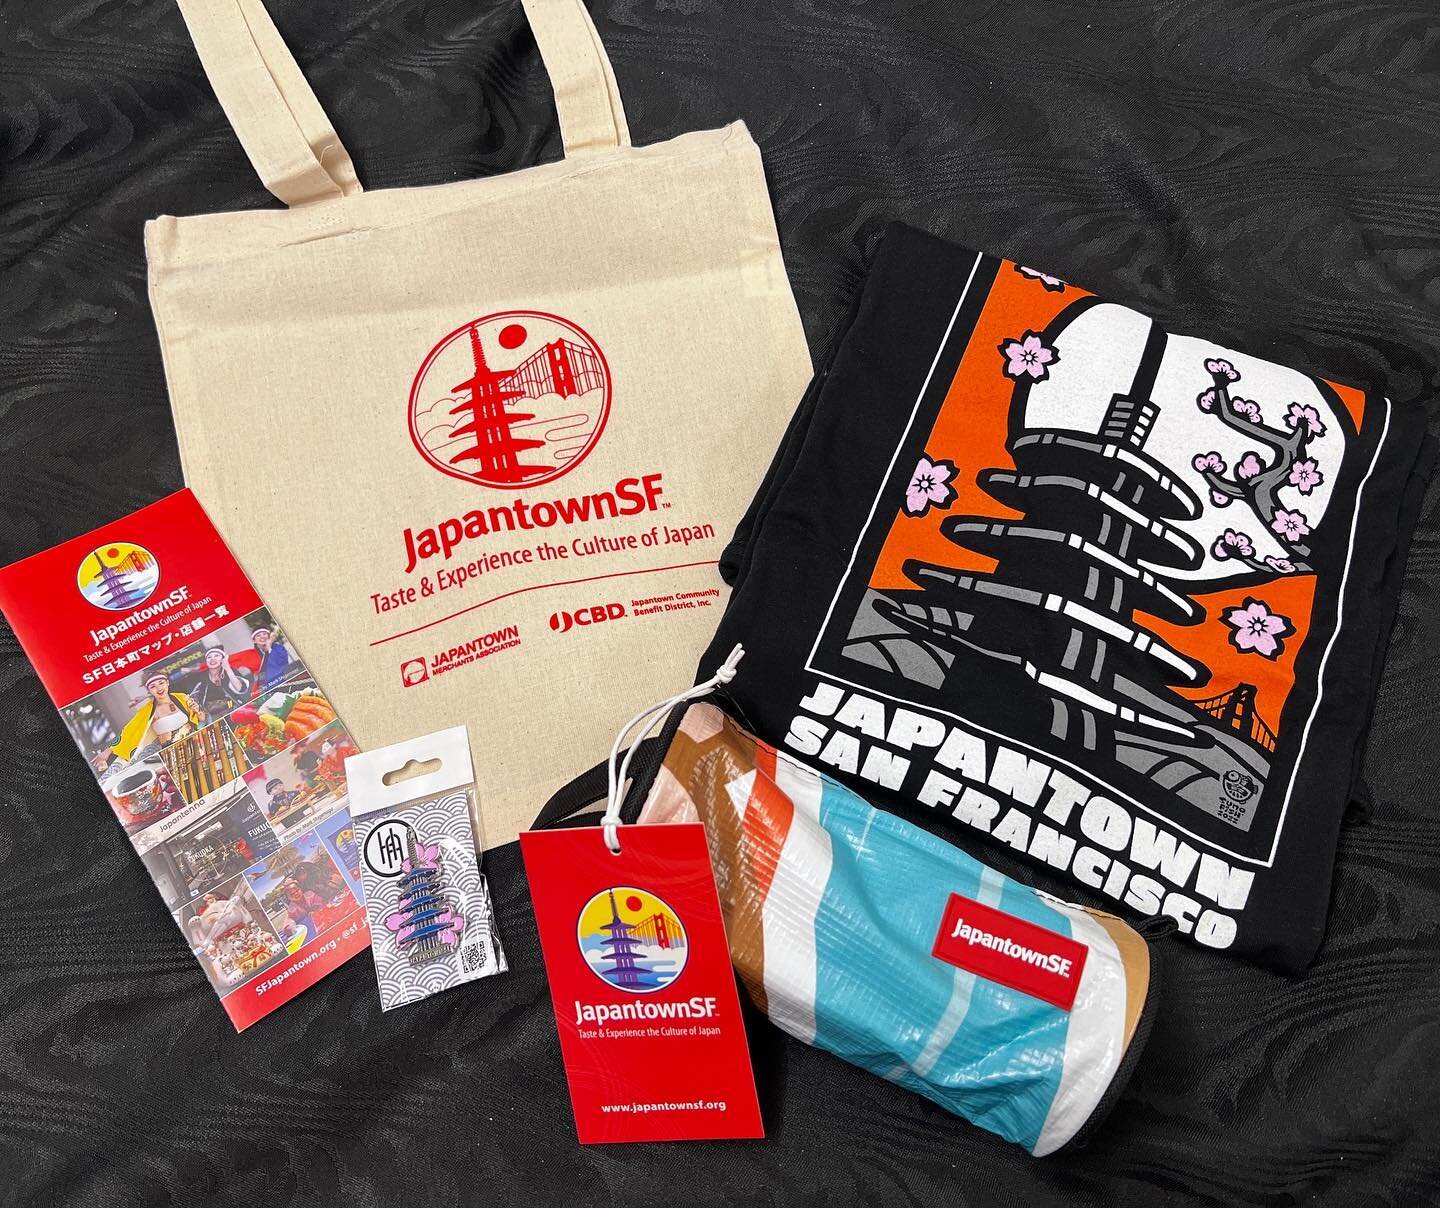 @japantowncbd is in Tokyo as part of the SF Travel Asia Mission: Tokyo. Huge appreciation to the Japantown Merchants Association for allowing our Executive Director @gracesf61 attend and represent @sf_japantown 

Showing here the goodie bag that will